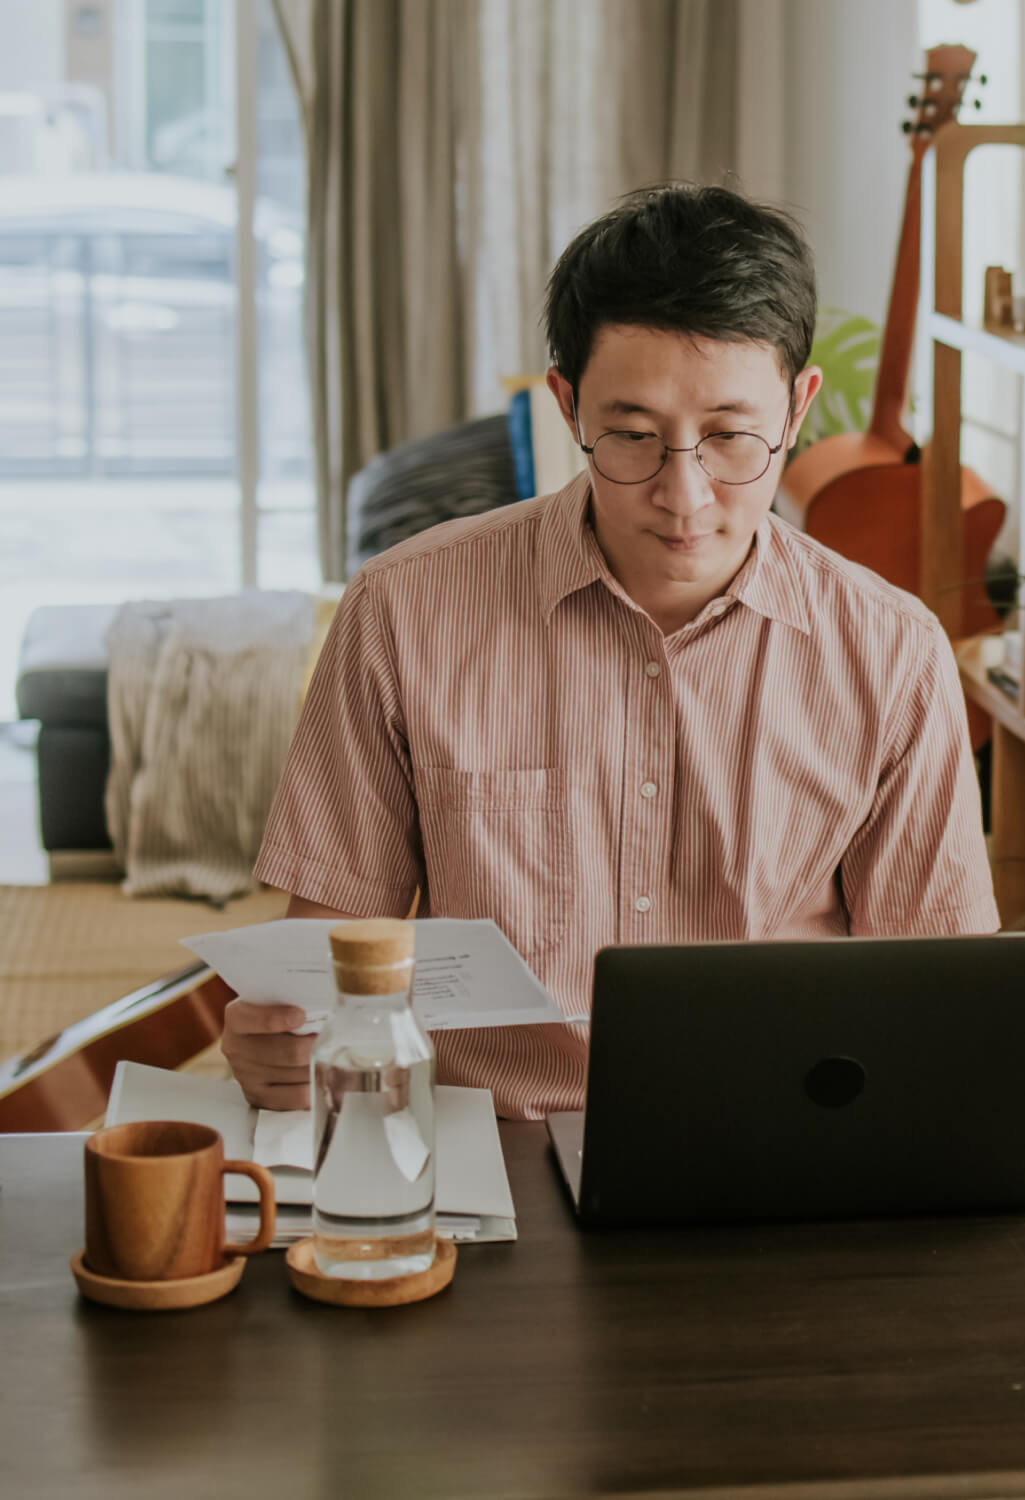 Man at a home desk with water and a laptop